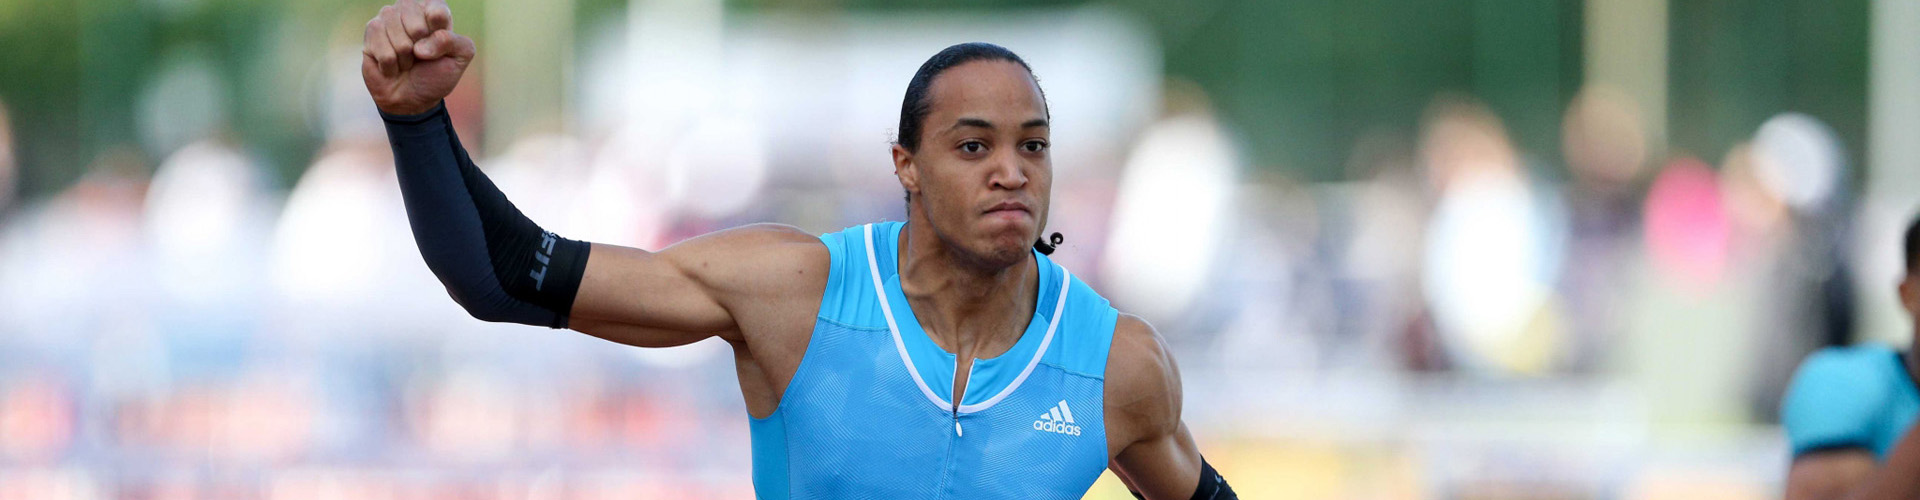 You are currently viewing RECORD DE FRANCE DE PASCAL MARTINOT-LAGARDE !